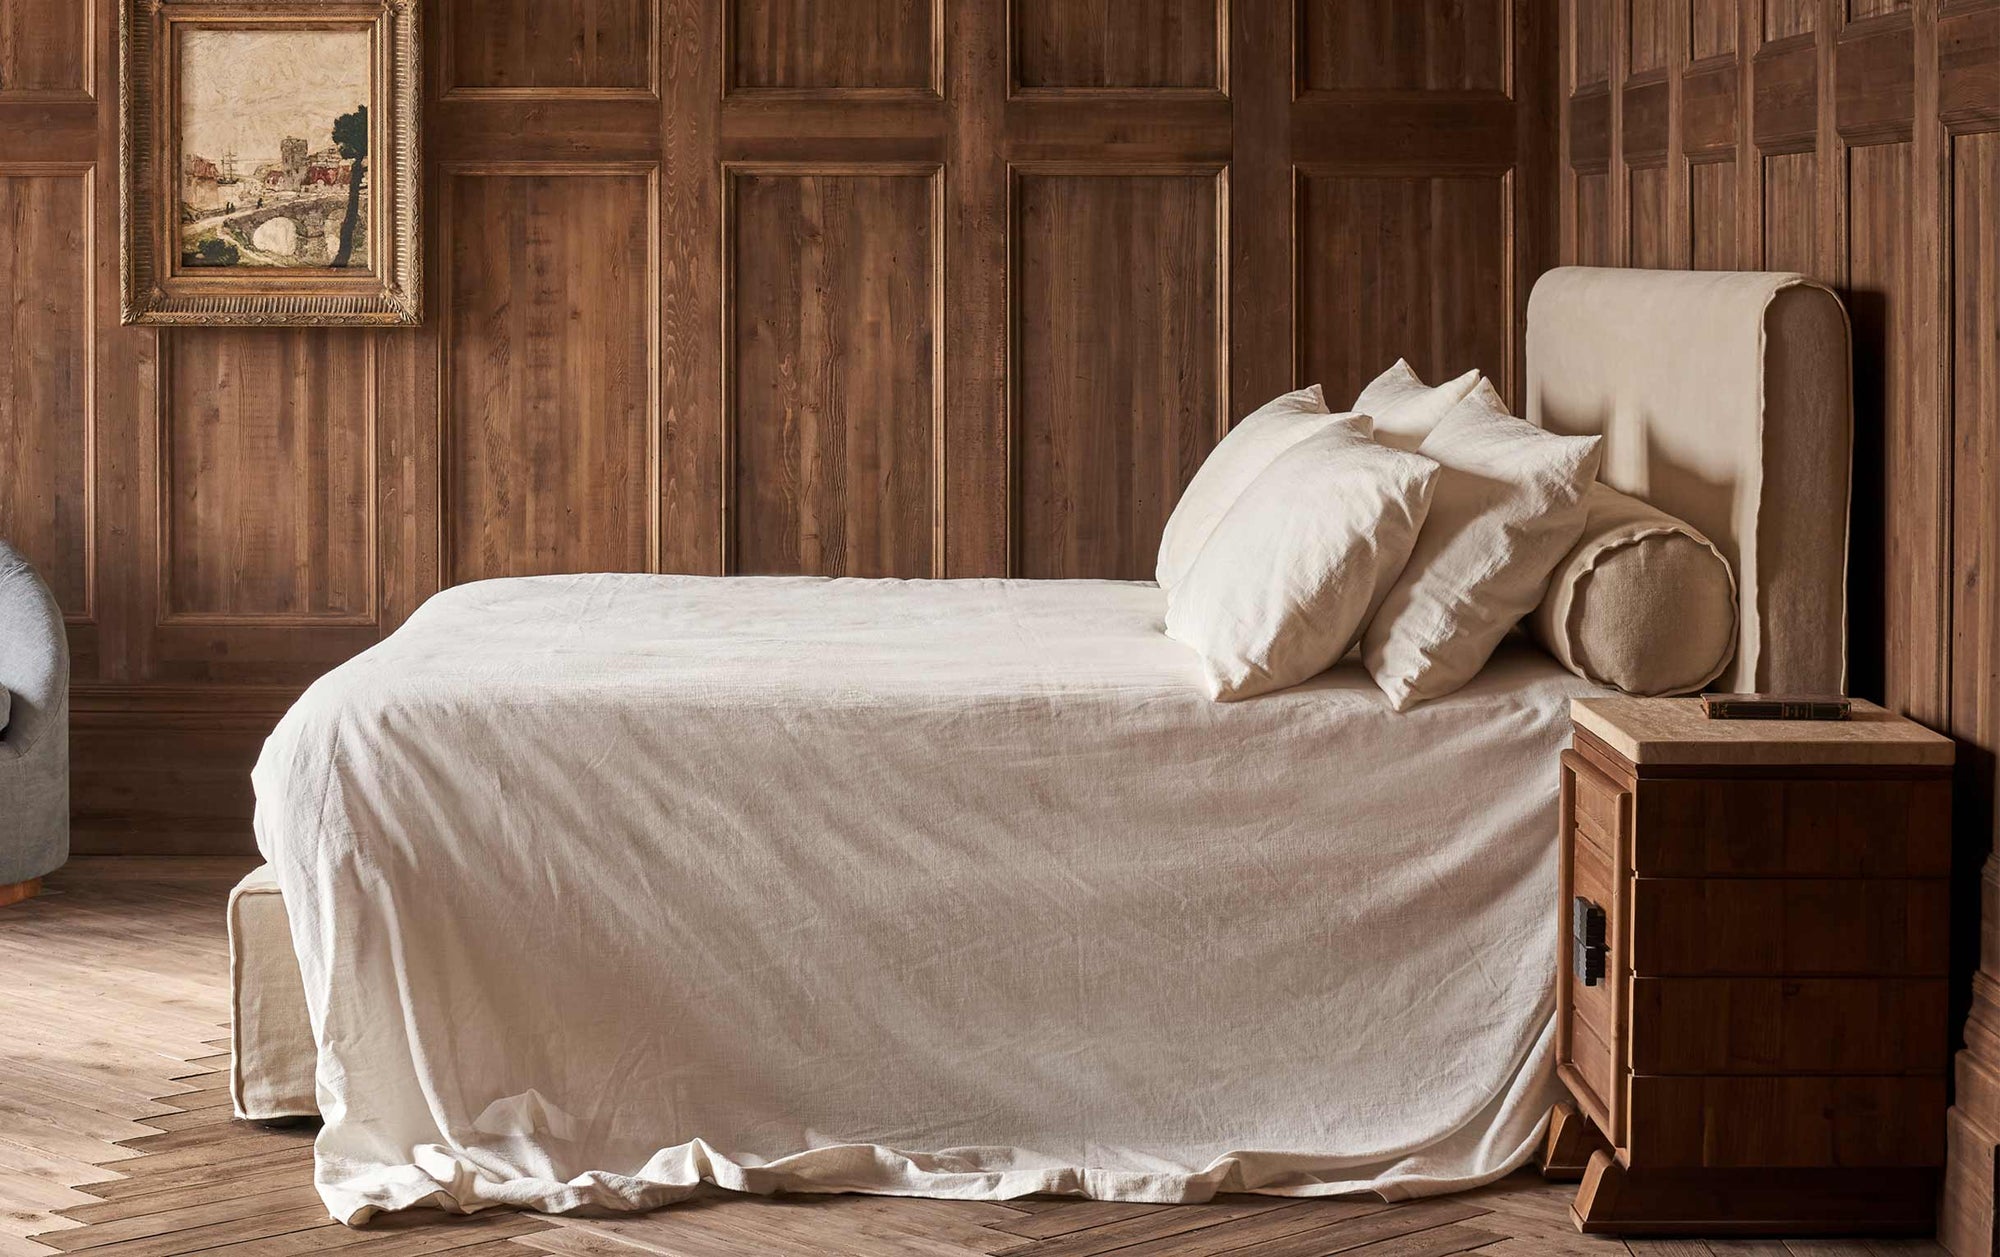 Camino Bed in Warm Oatmeal, a light warm beige Medium Weight Linen, placed in a wood panelled room and made with white linen bedding